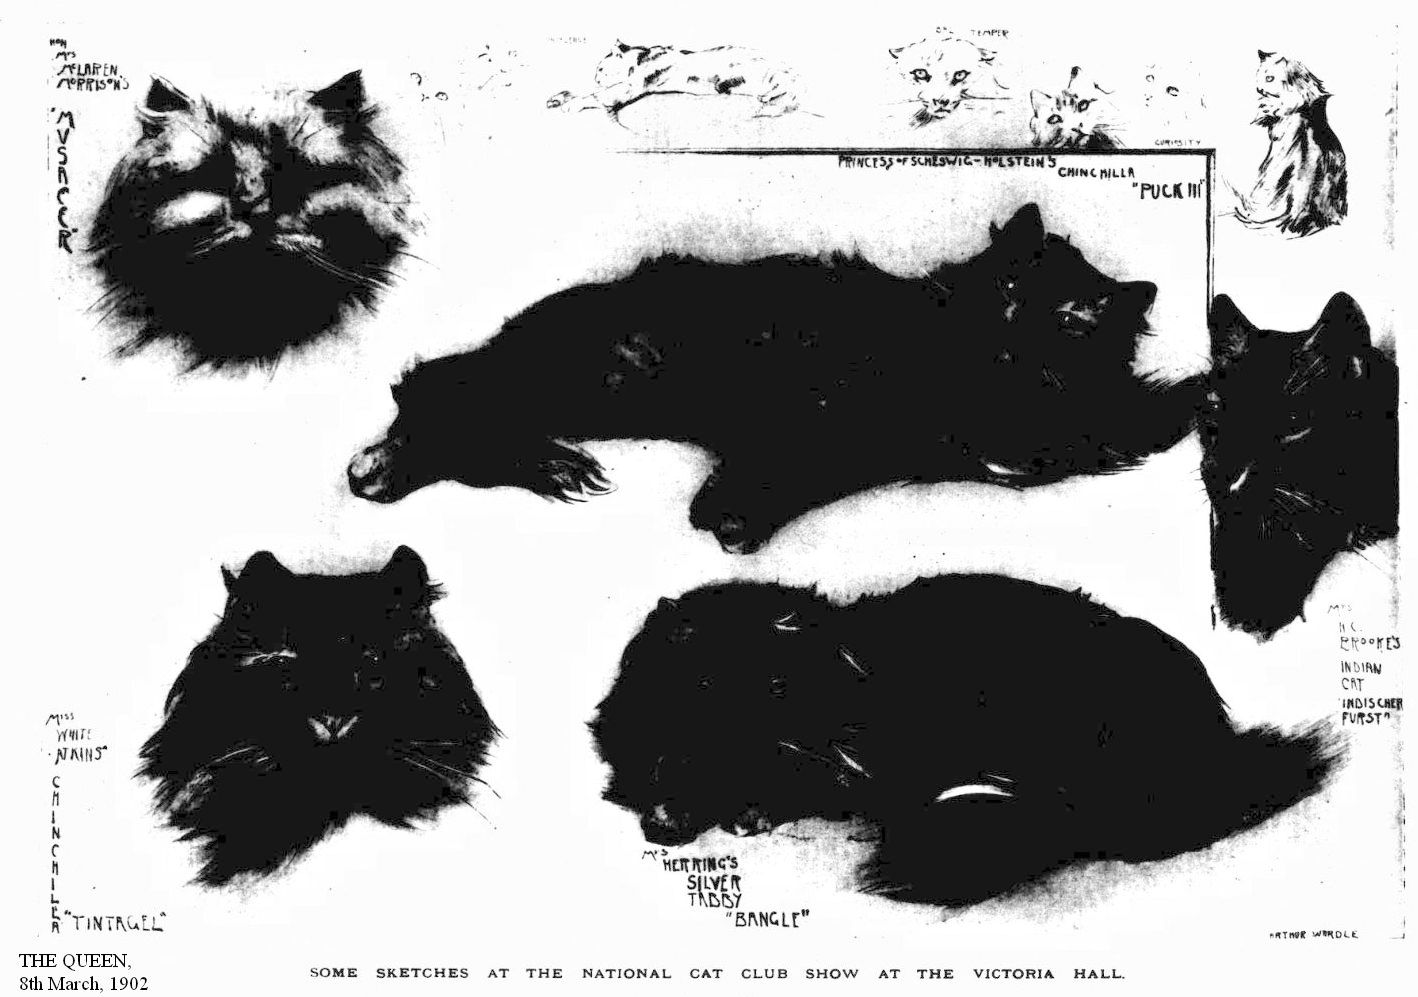 REPORTS FROM THE EARLY BRITISH CAT SHOWS 1902